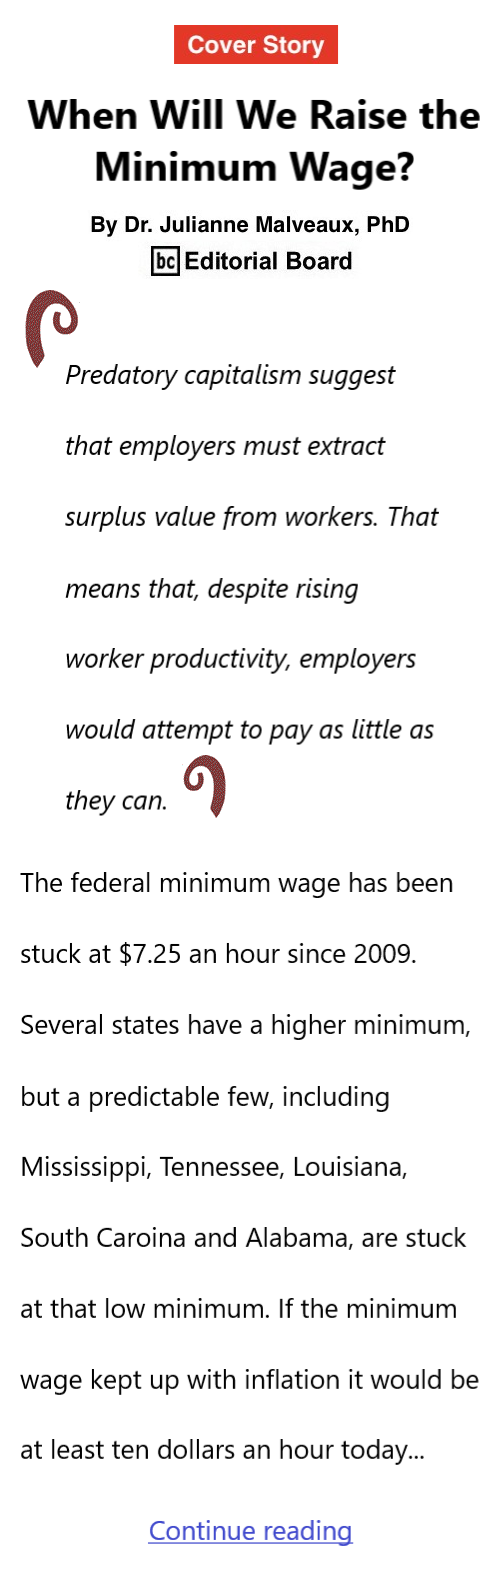 BlackCommentator.com Oct 12, 2023 - Issue 973: Cover Story - When Will We Raise the Minimum Wage? By Dr. Julianne Malveaux, PhD, BC Editorial Board